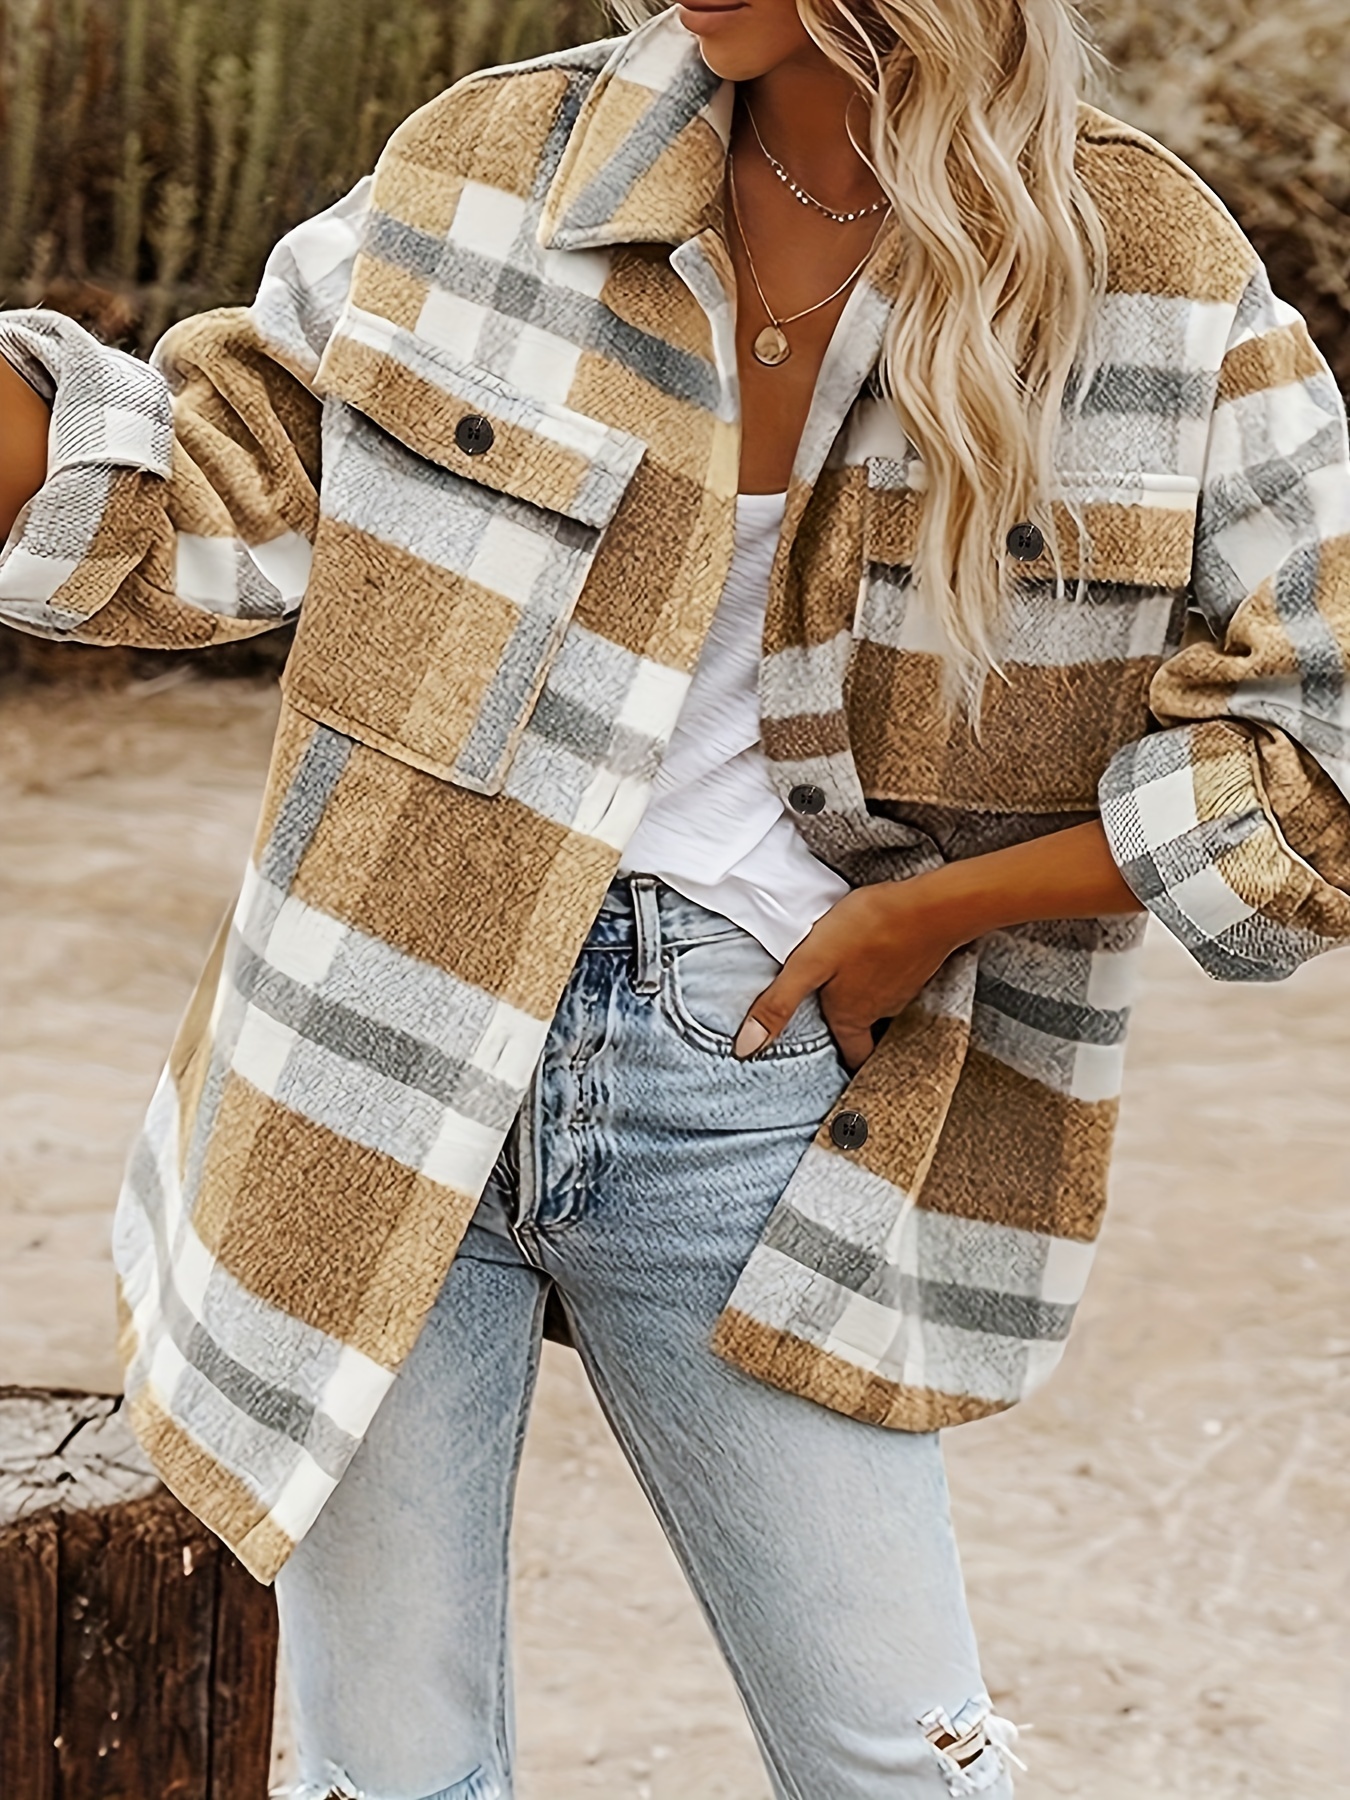 Meichang Women's Cardigan Puff Bat-Wing Sleeves Jacket Open Front Button  Down Loose Fit Coat Fashion Plaid Print Shacket Fall Clearance 